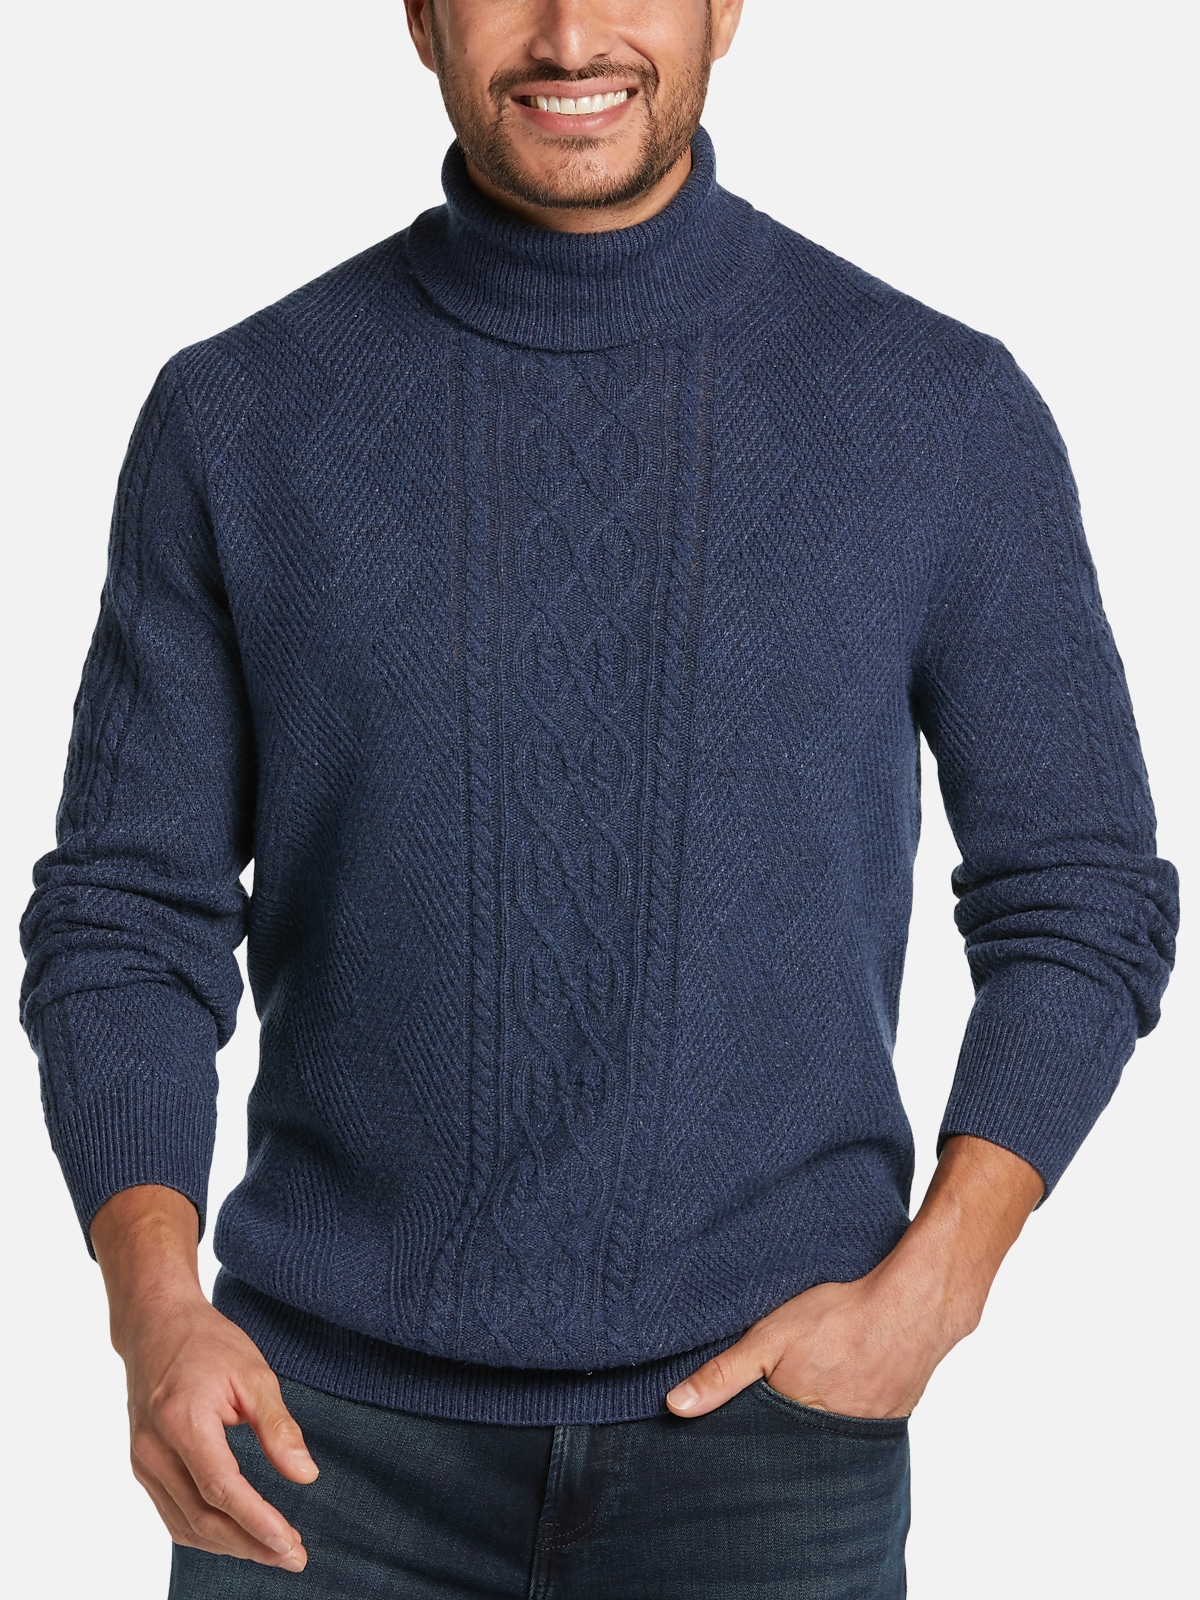 Jos. A Bank Modern Fit Cable Knit Turtleneck Sweater | All Sale| Men's ...